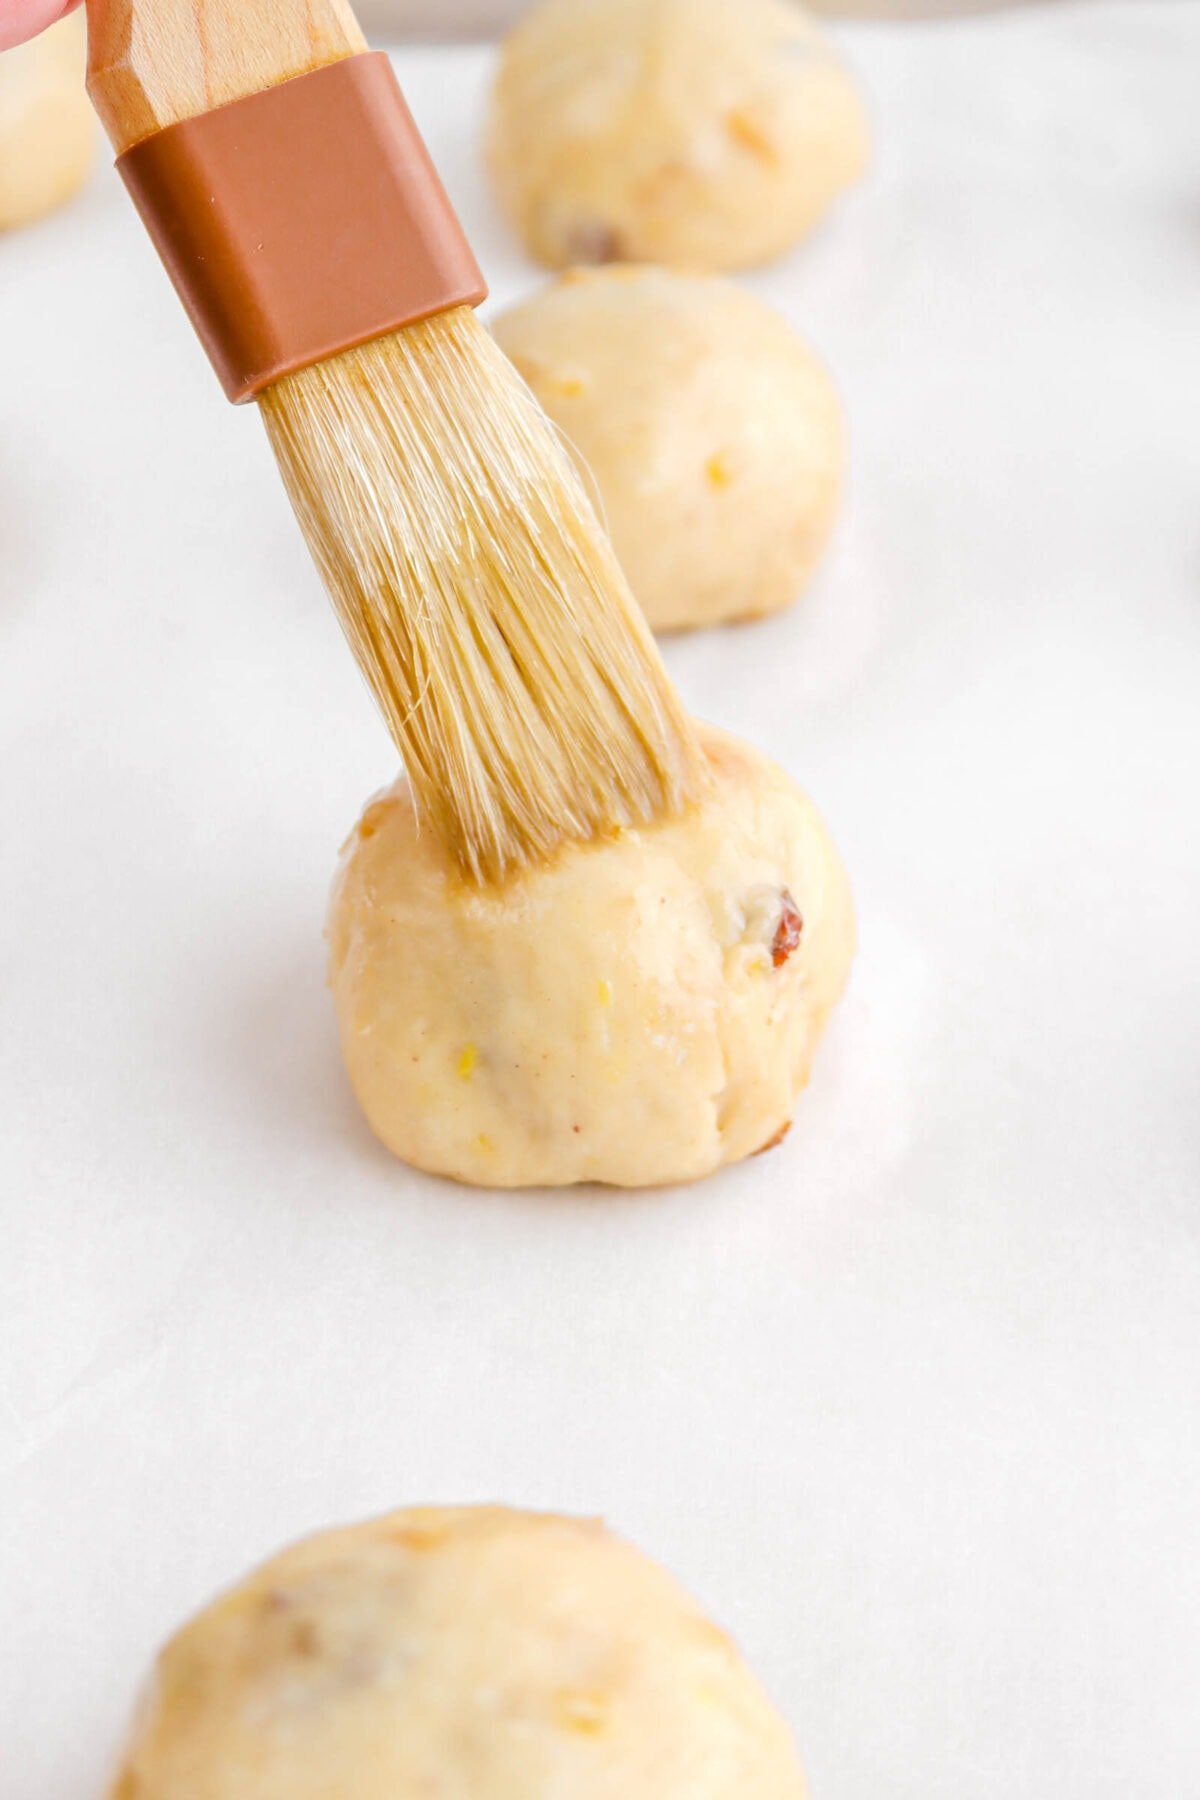 dough ball being brushed with egg wash